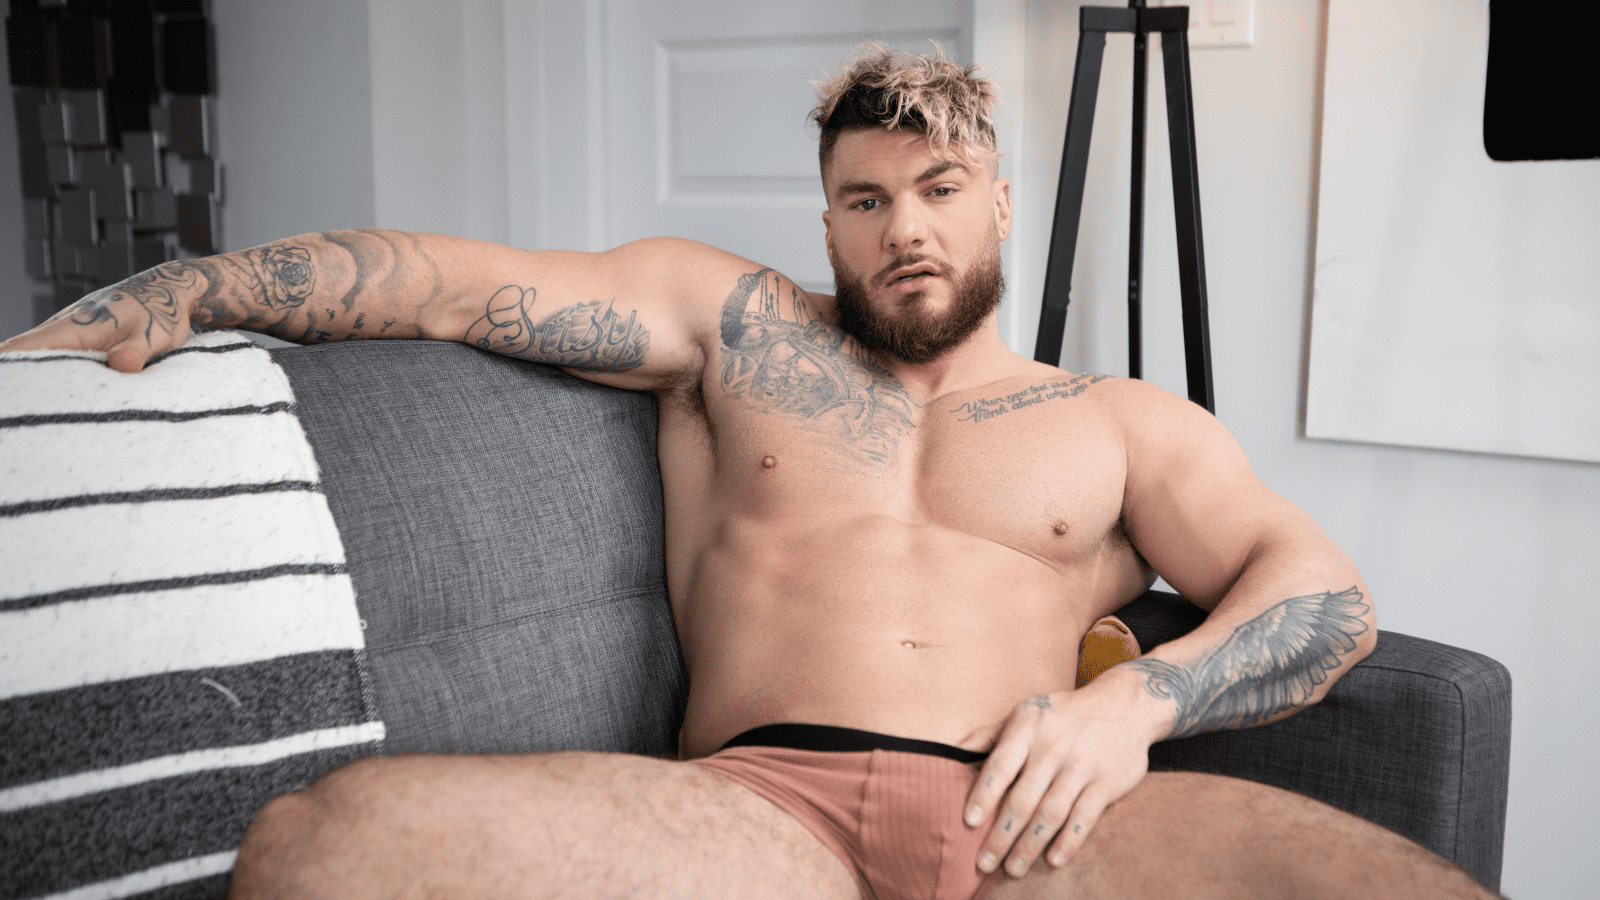 Powerful Porn Star William Seed is Back on Men.com!